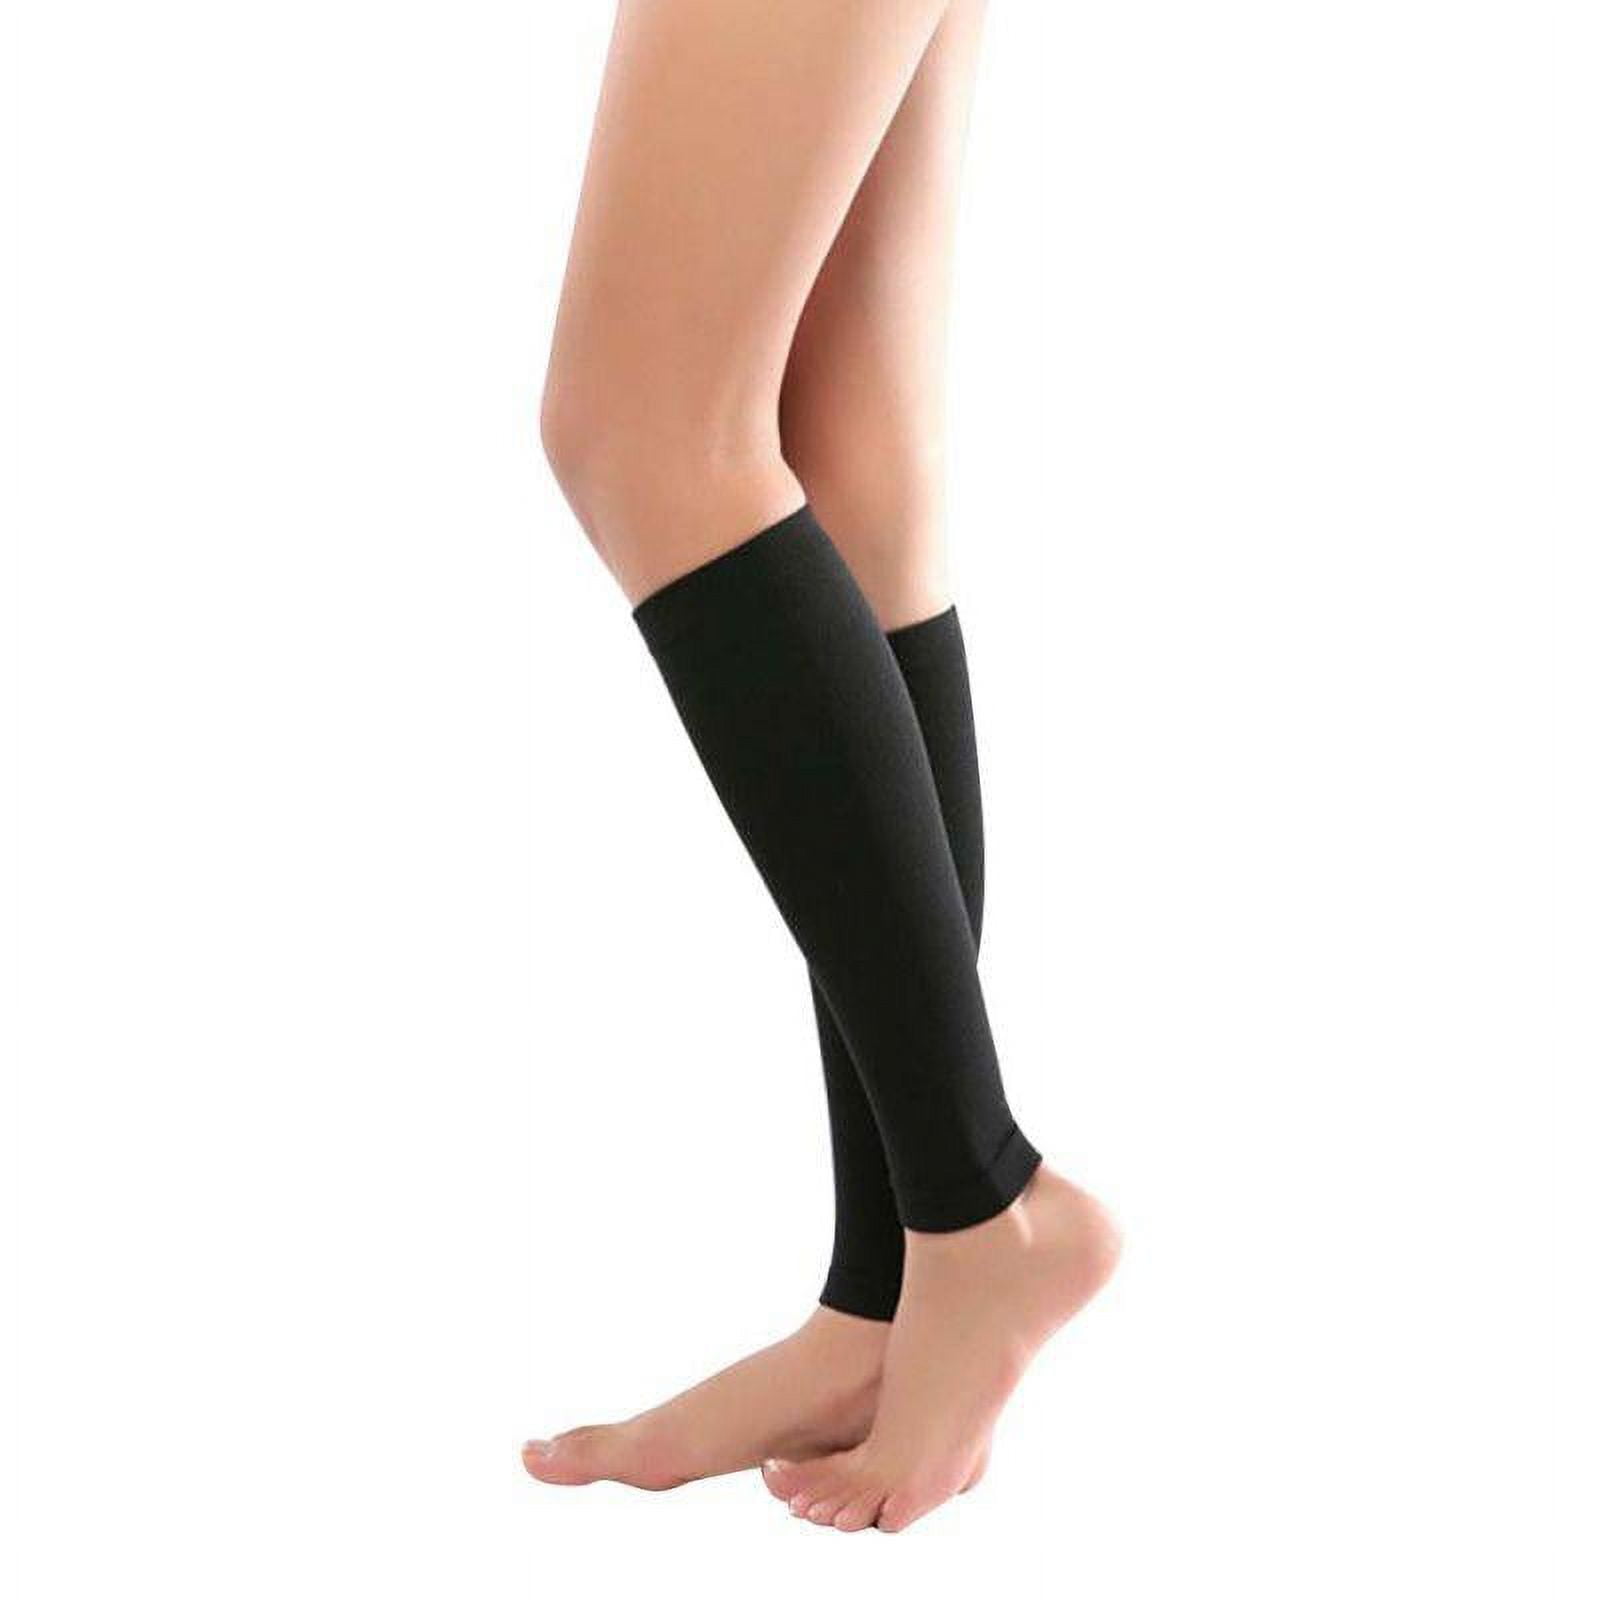 Calf Compression Sleeve Women, 1 Pair Calf Support Footless Compression  Socks Stockings for Shin Splints, Varicose Veins, Relieve Recovery, Skin  Color 